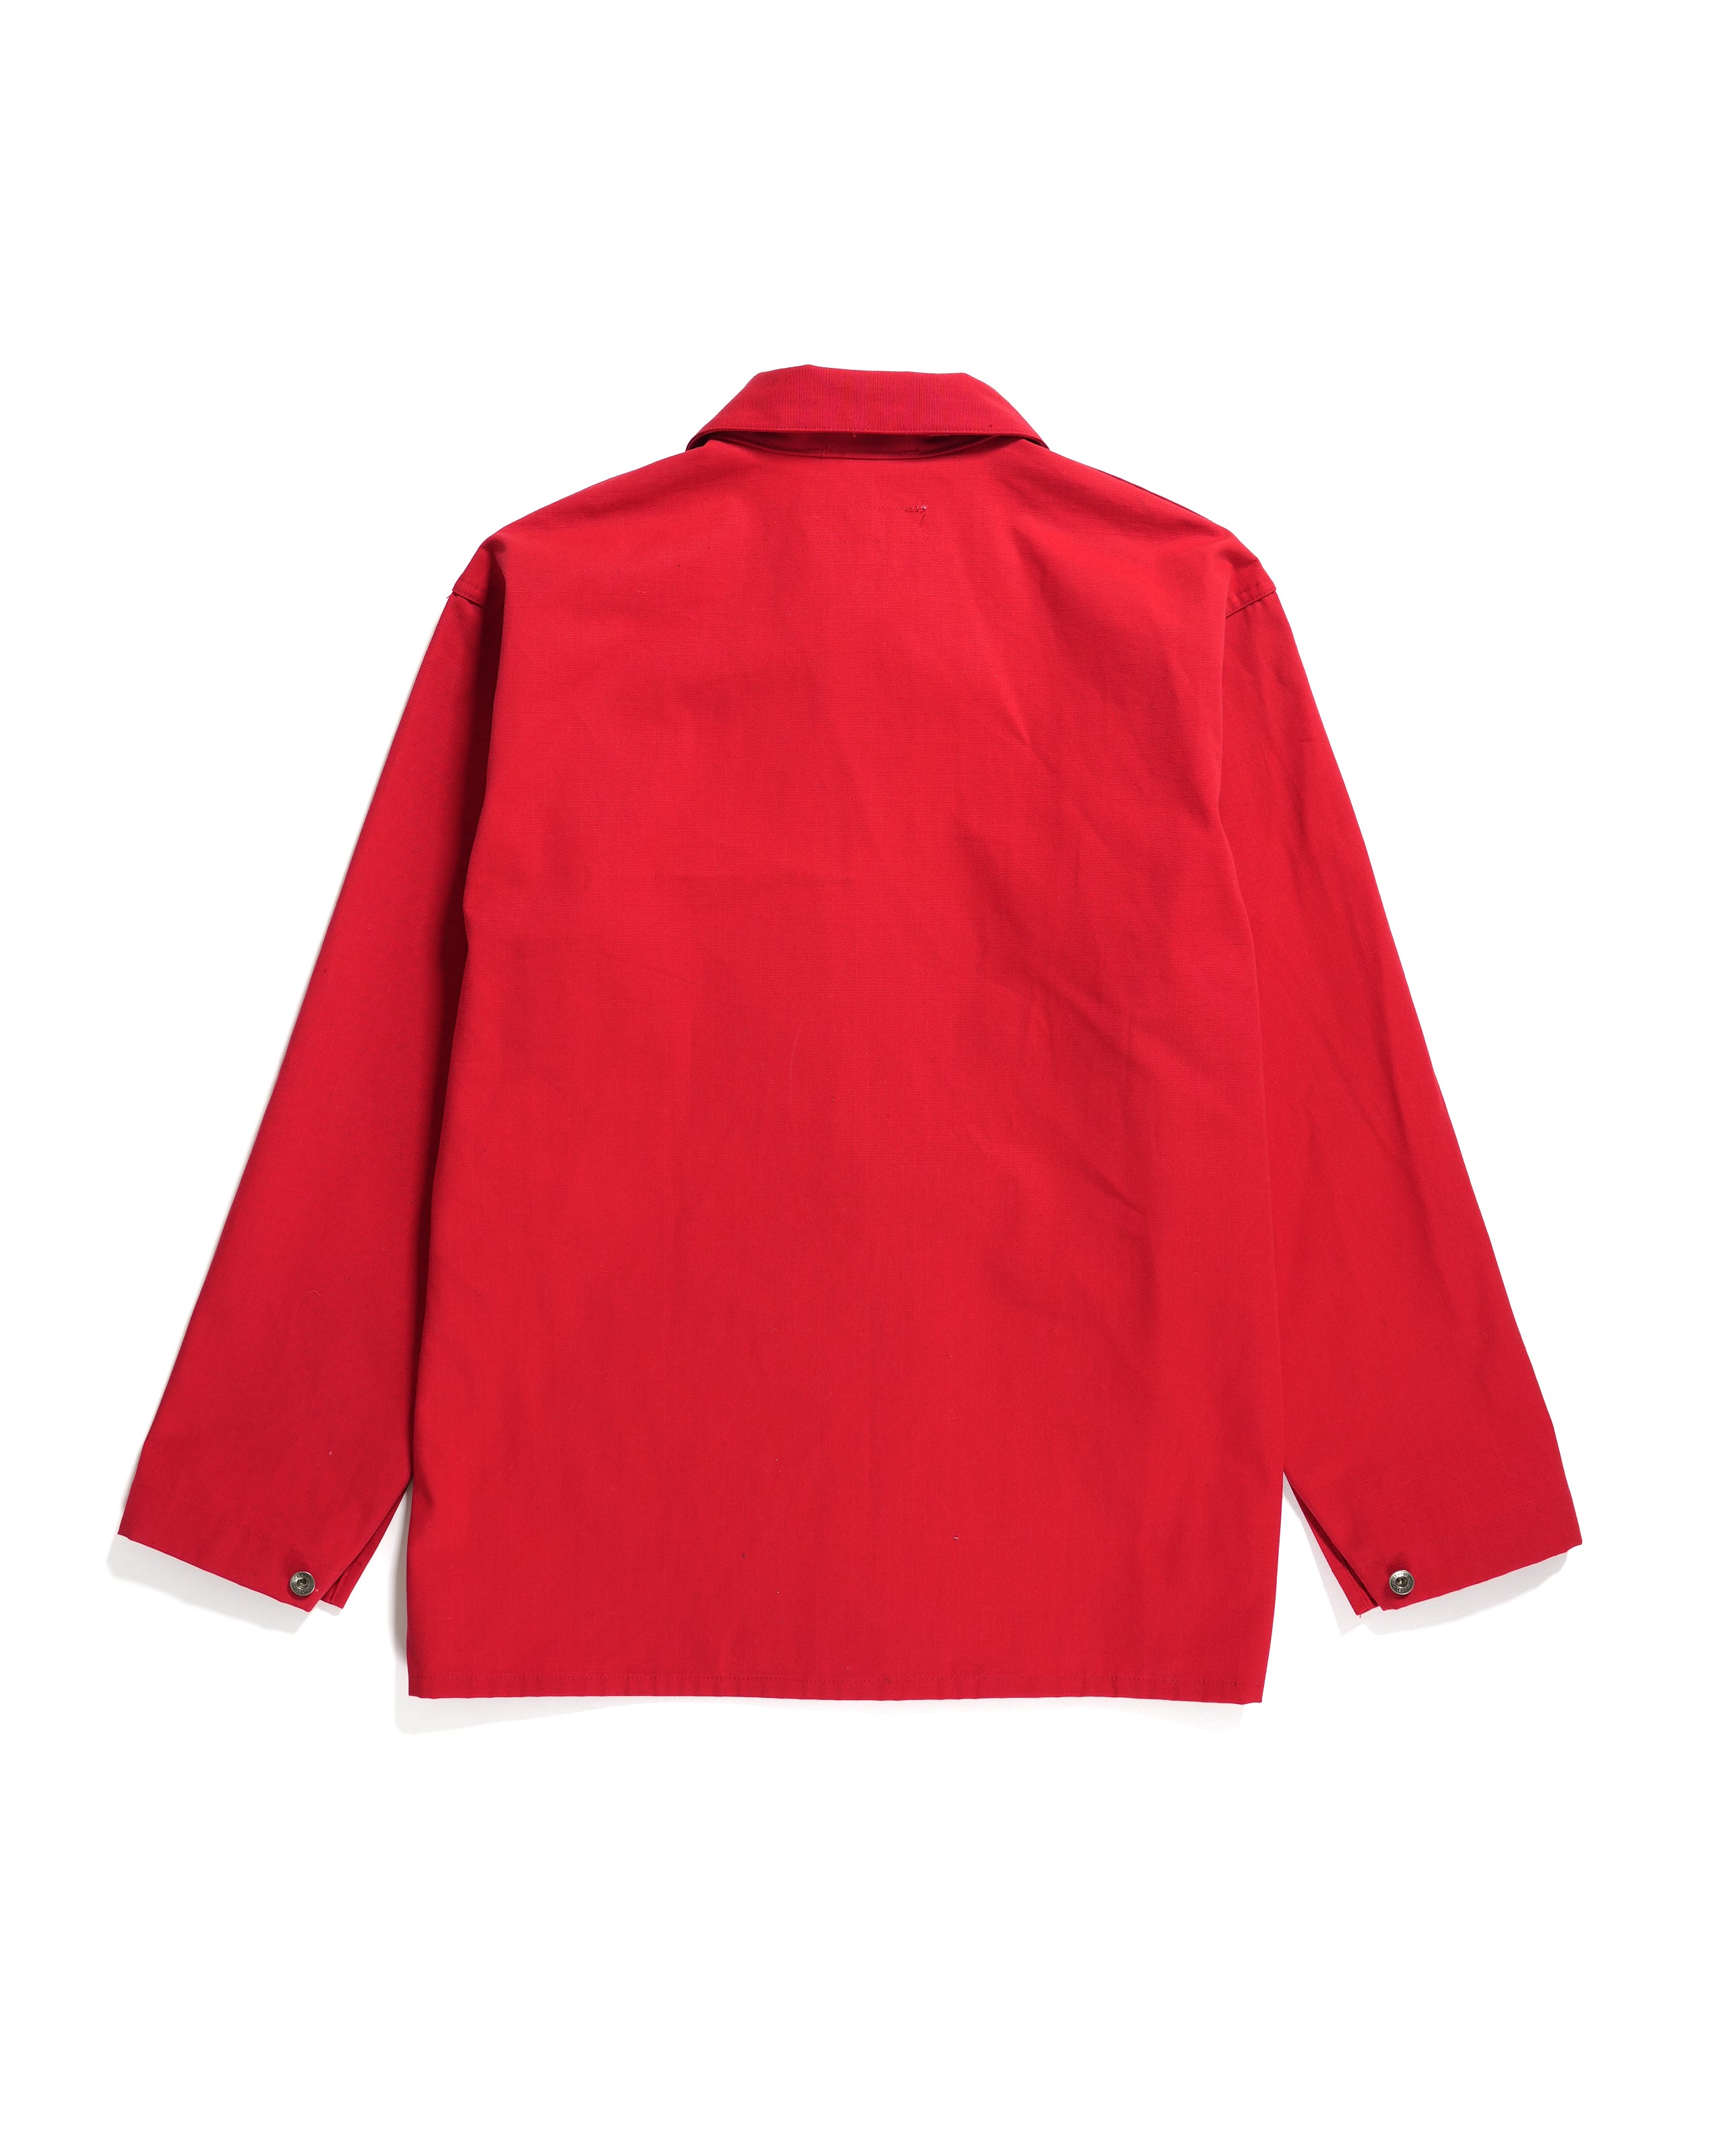 Utility Jacket - Red Heavyweight Cotton Ripstop